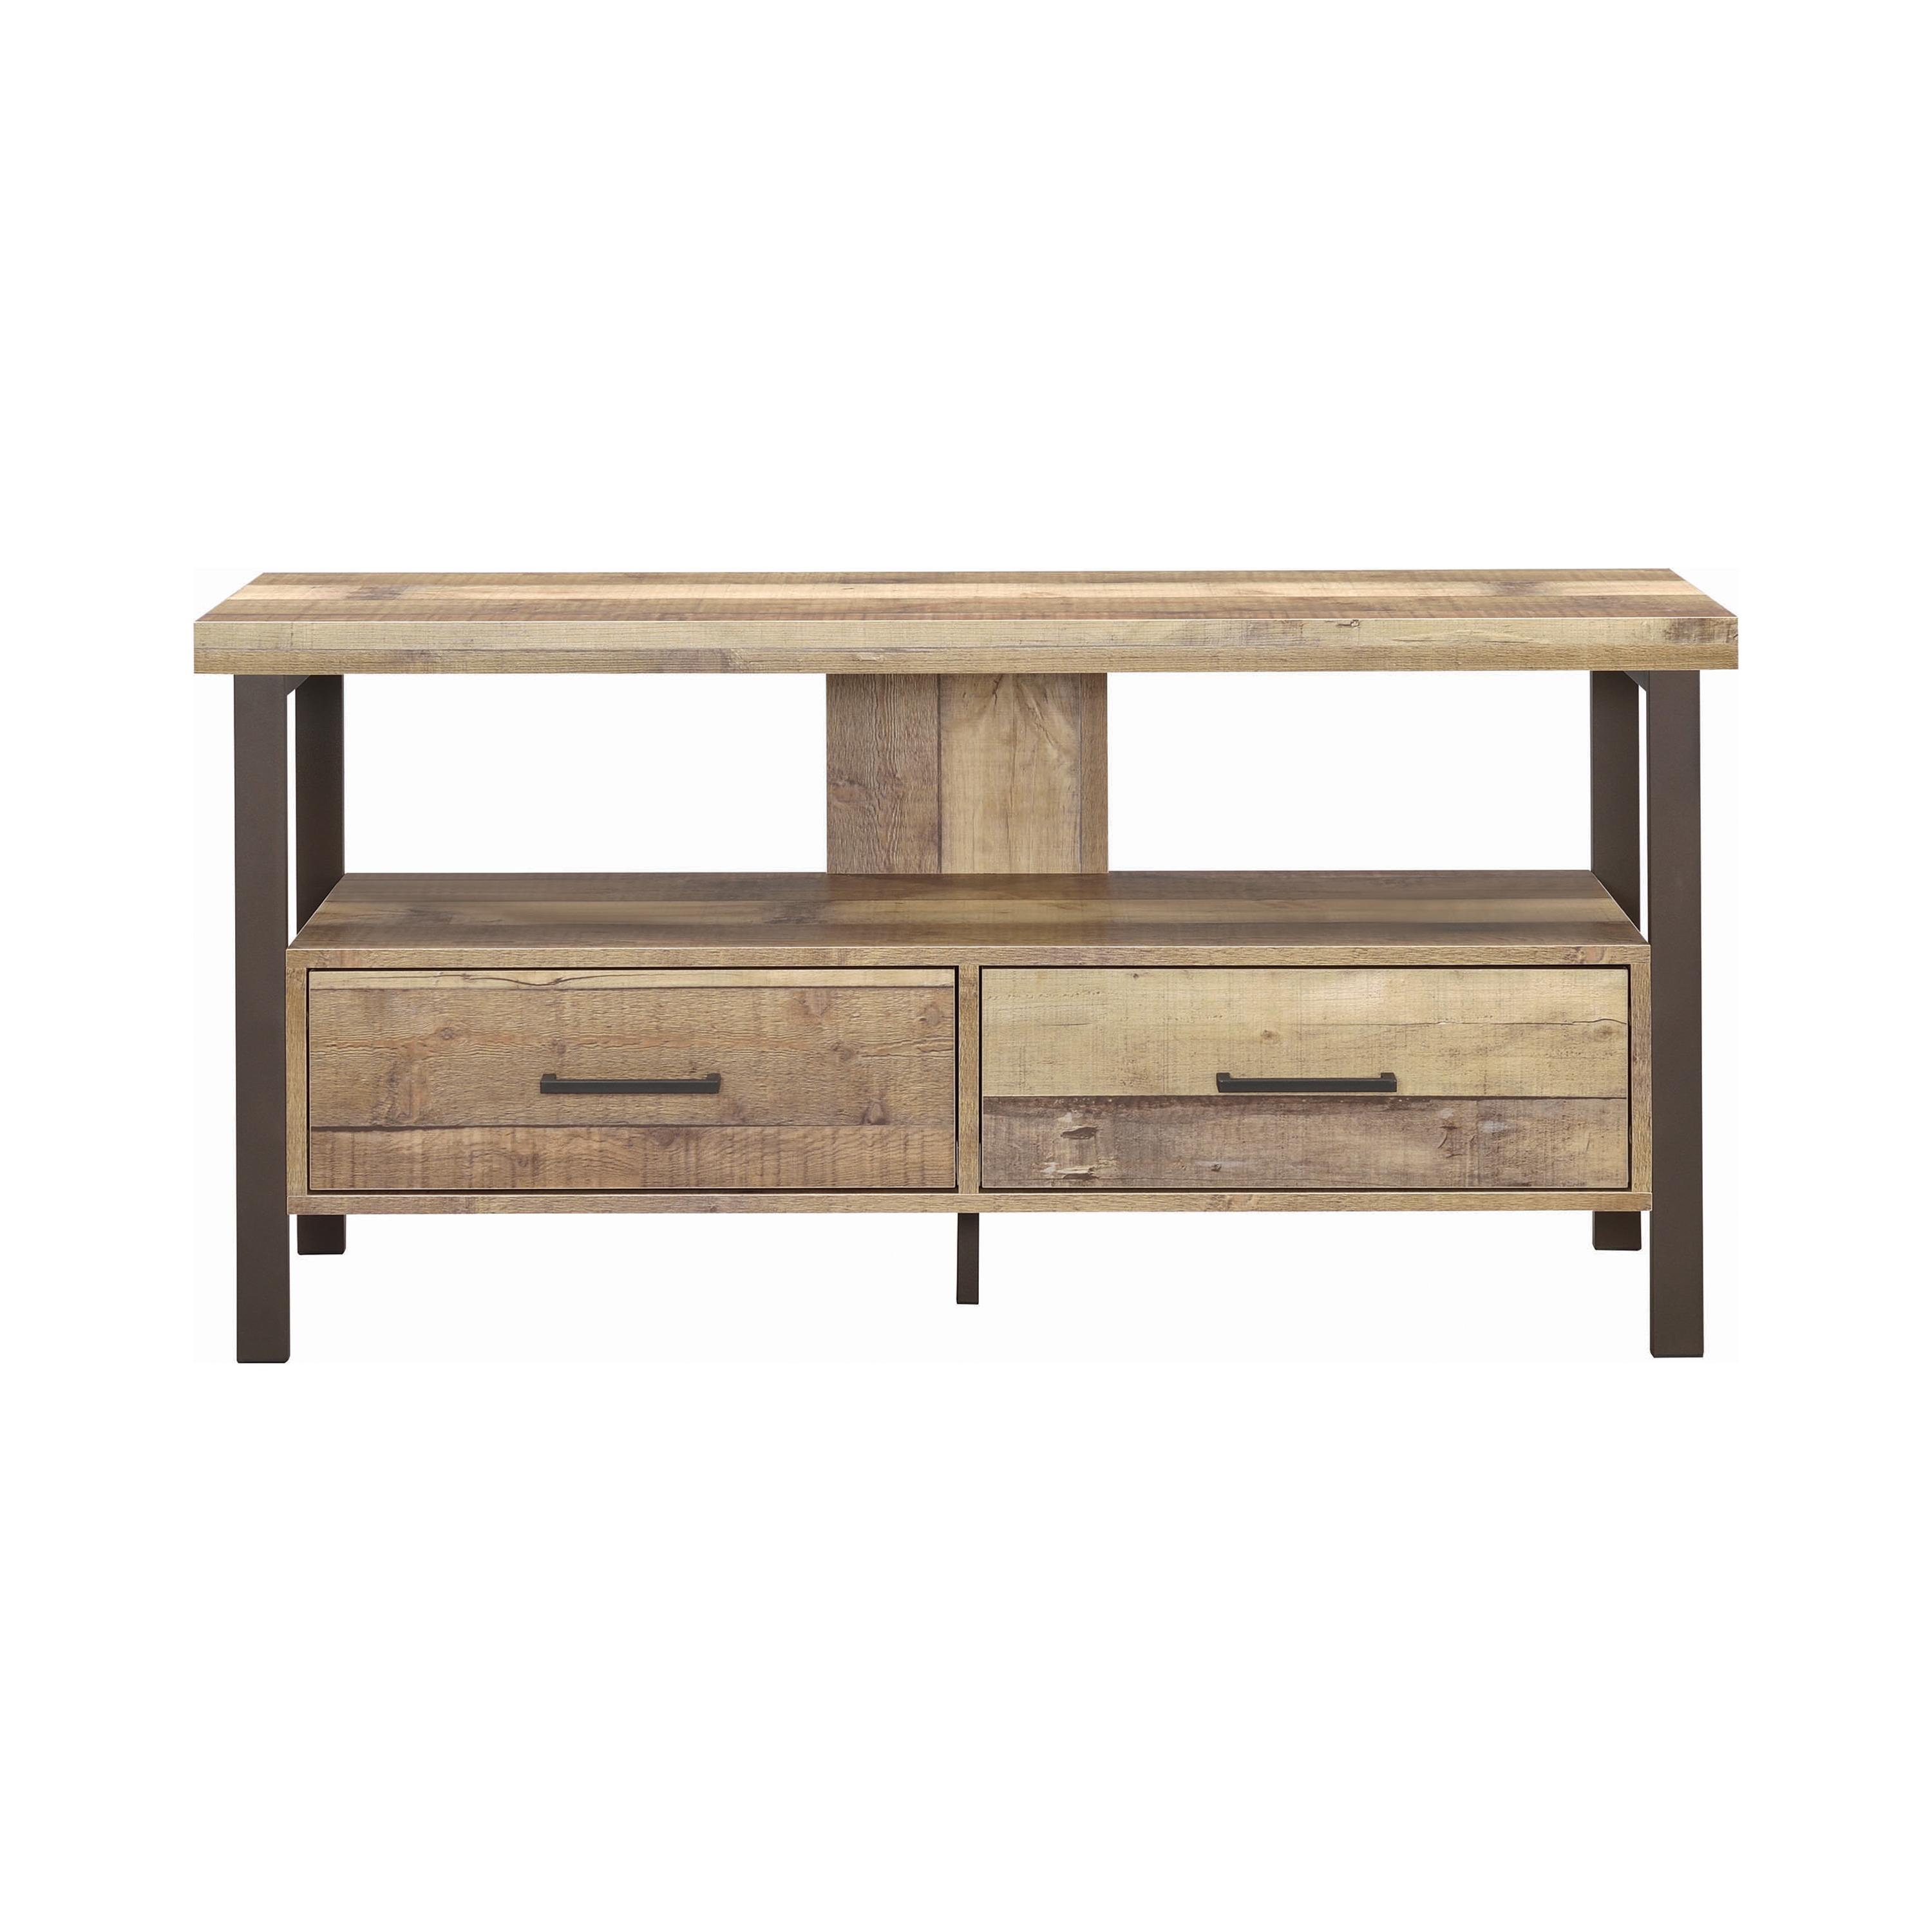 Rustic Tv Console 721882 721882 in Brown 